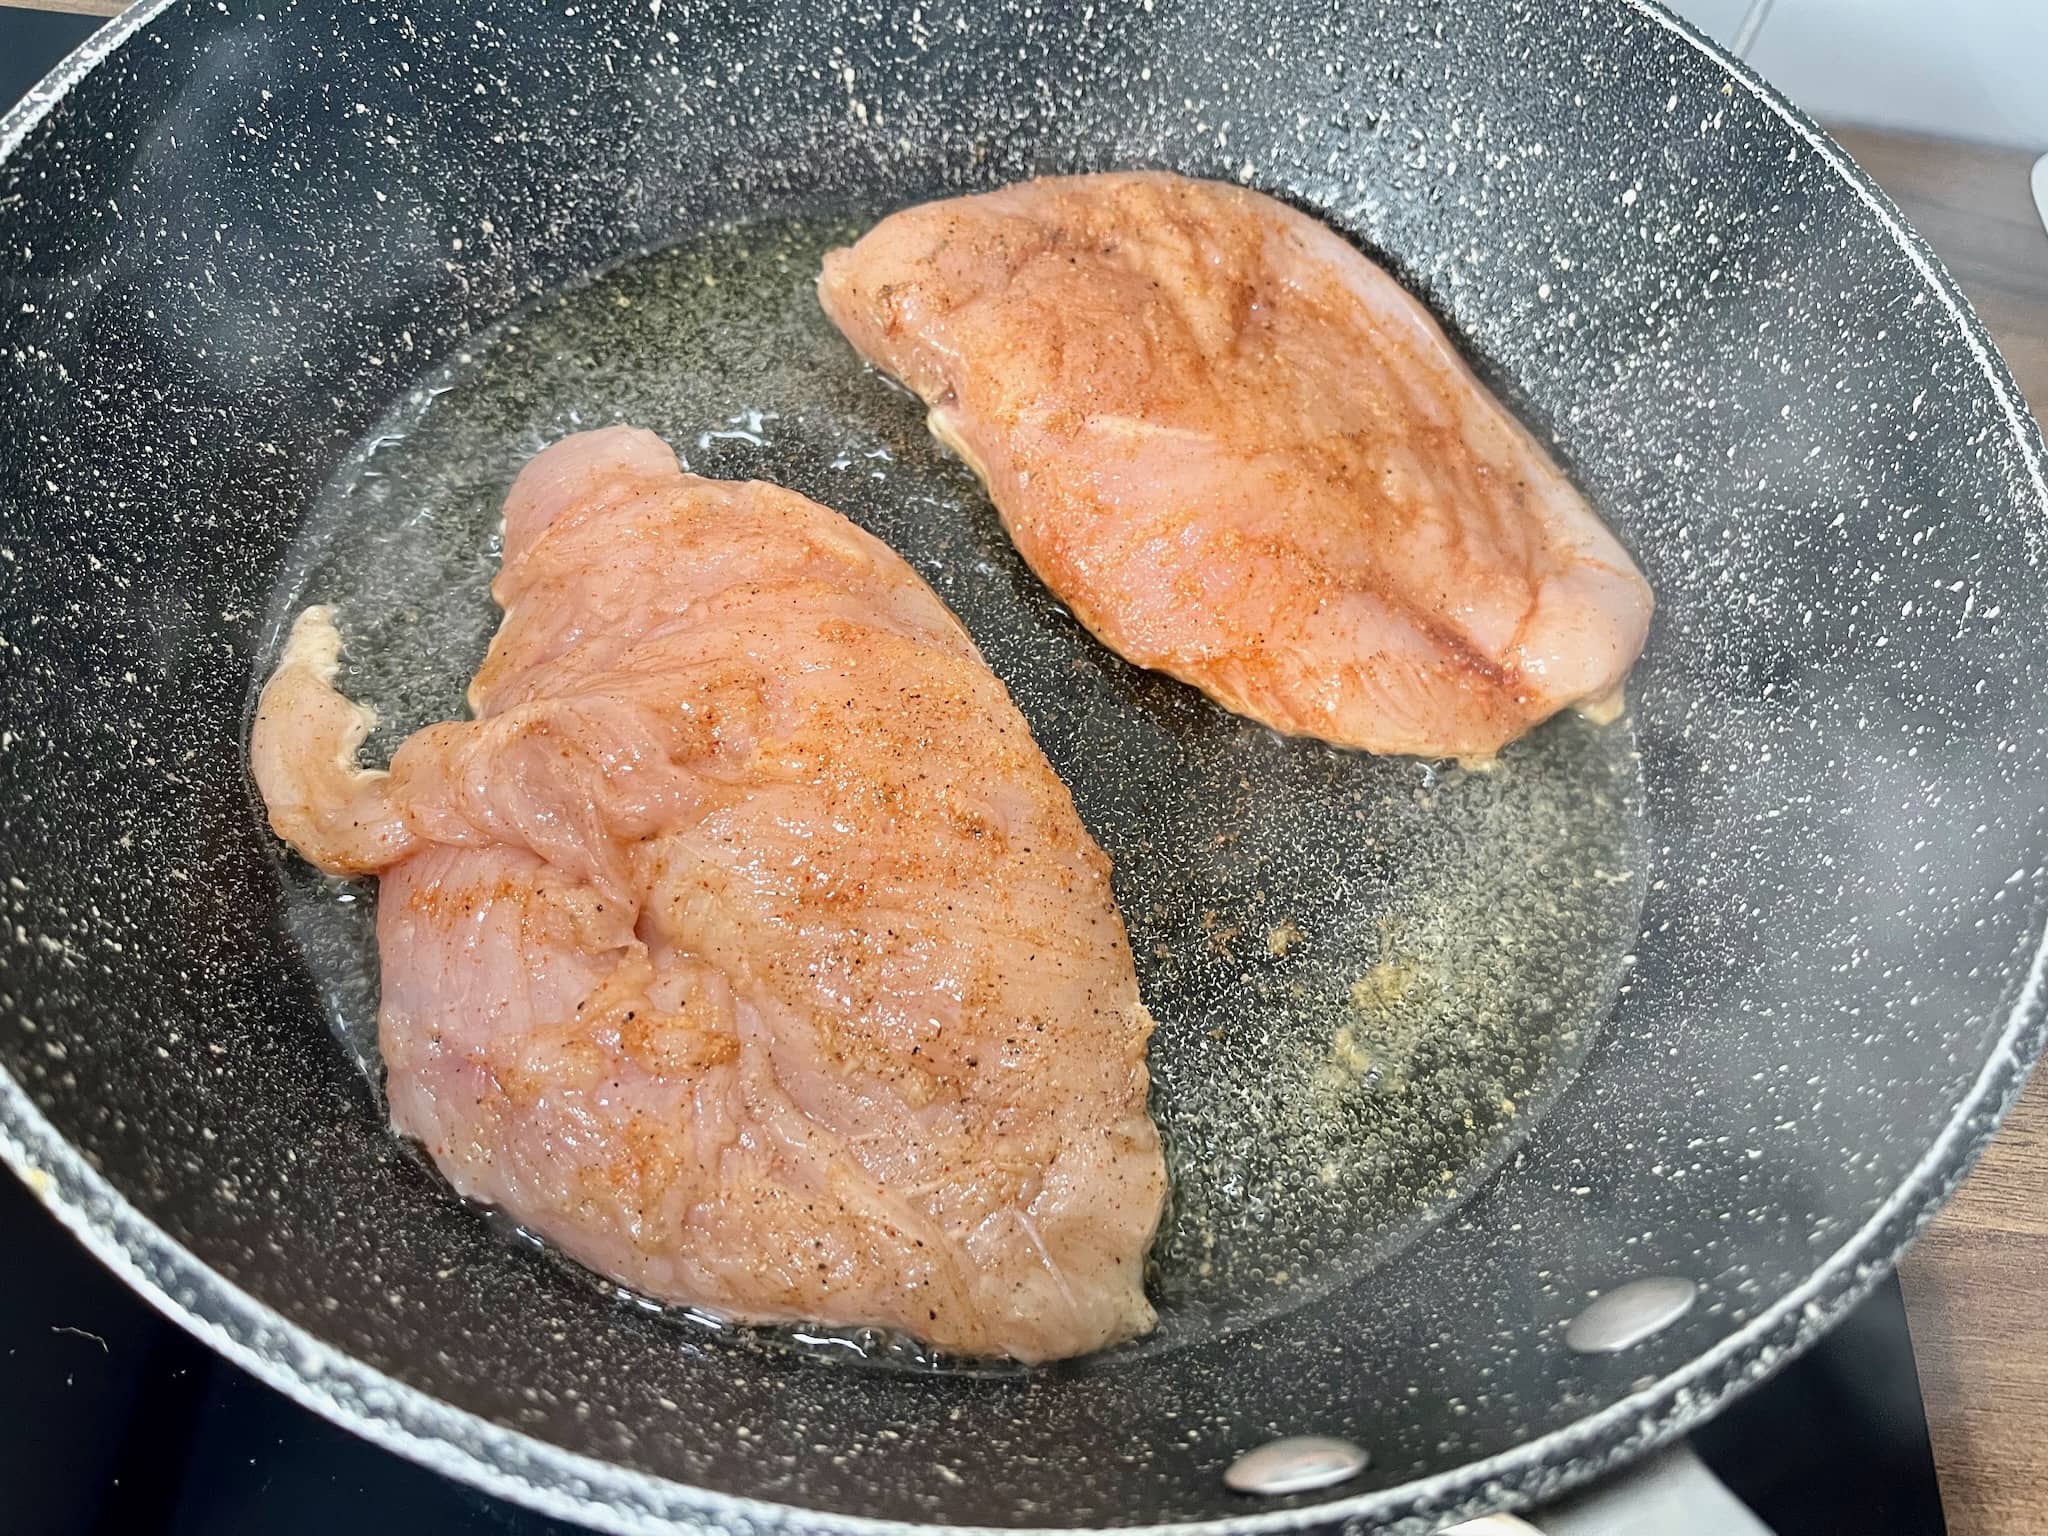 Chicken breasts seasoned with paprika, garlic and black pepper fried in a pan